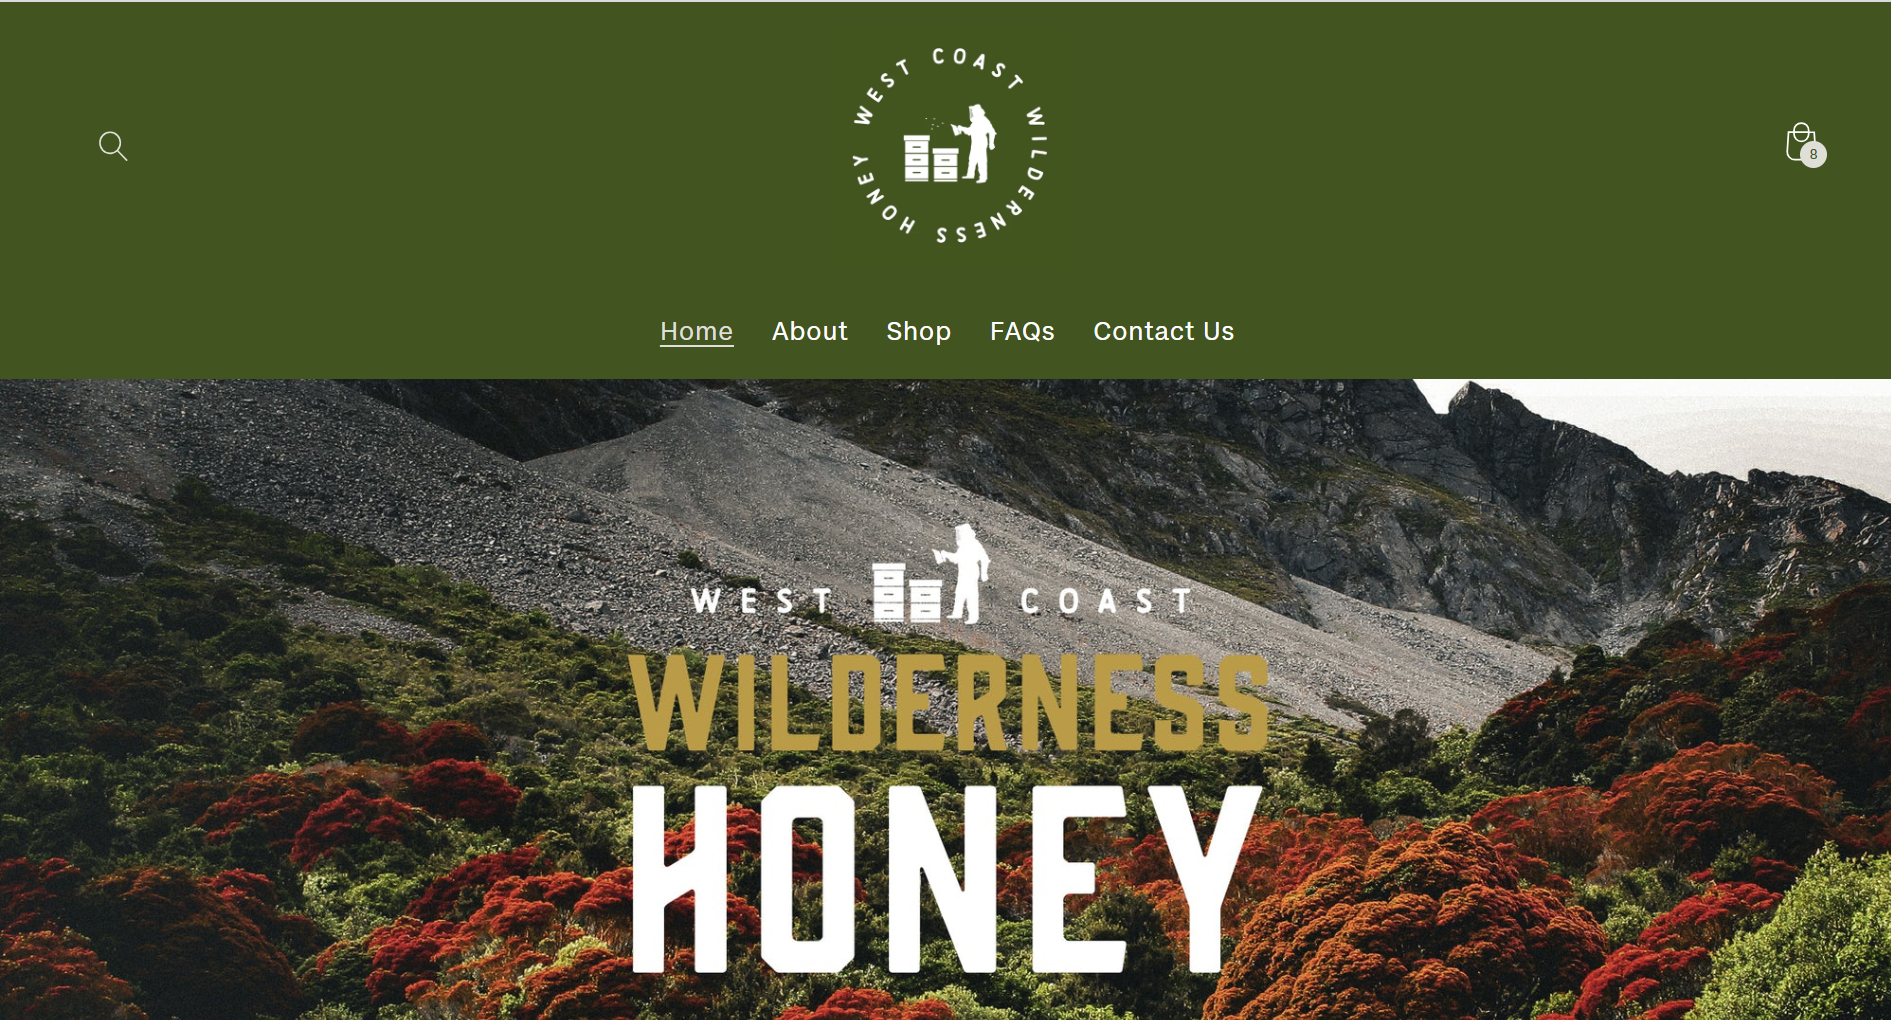 West Coast Wilderness Honey Homepage. Website designed and developed by digital refinery